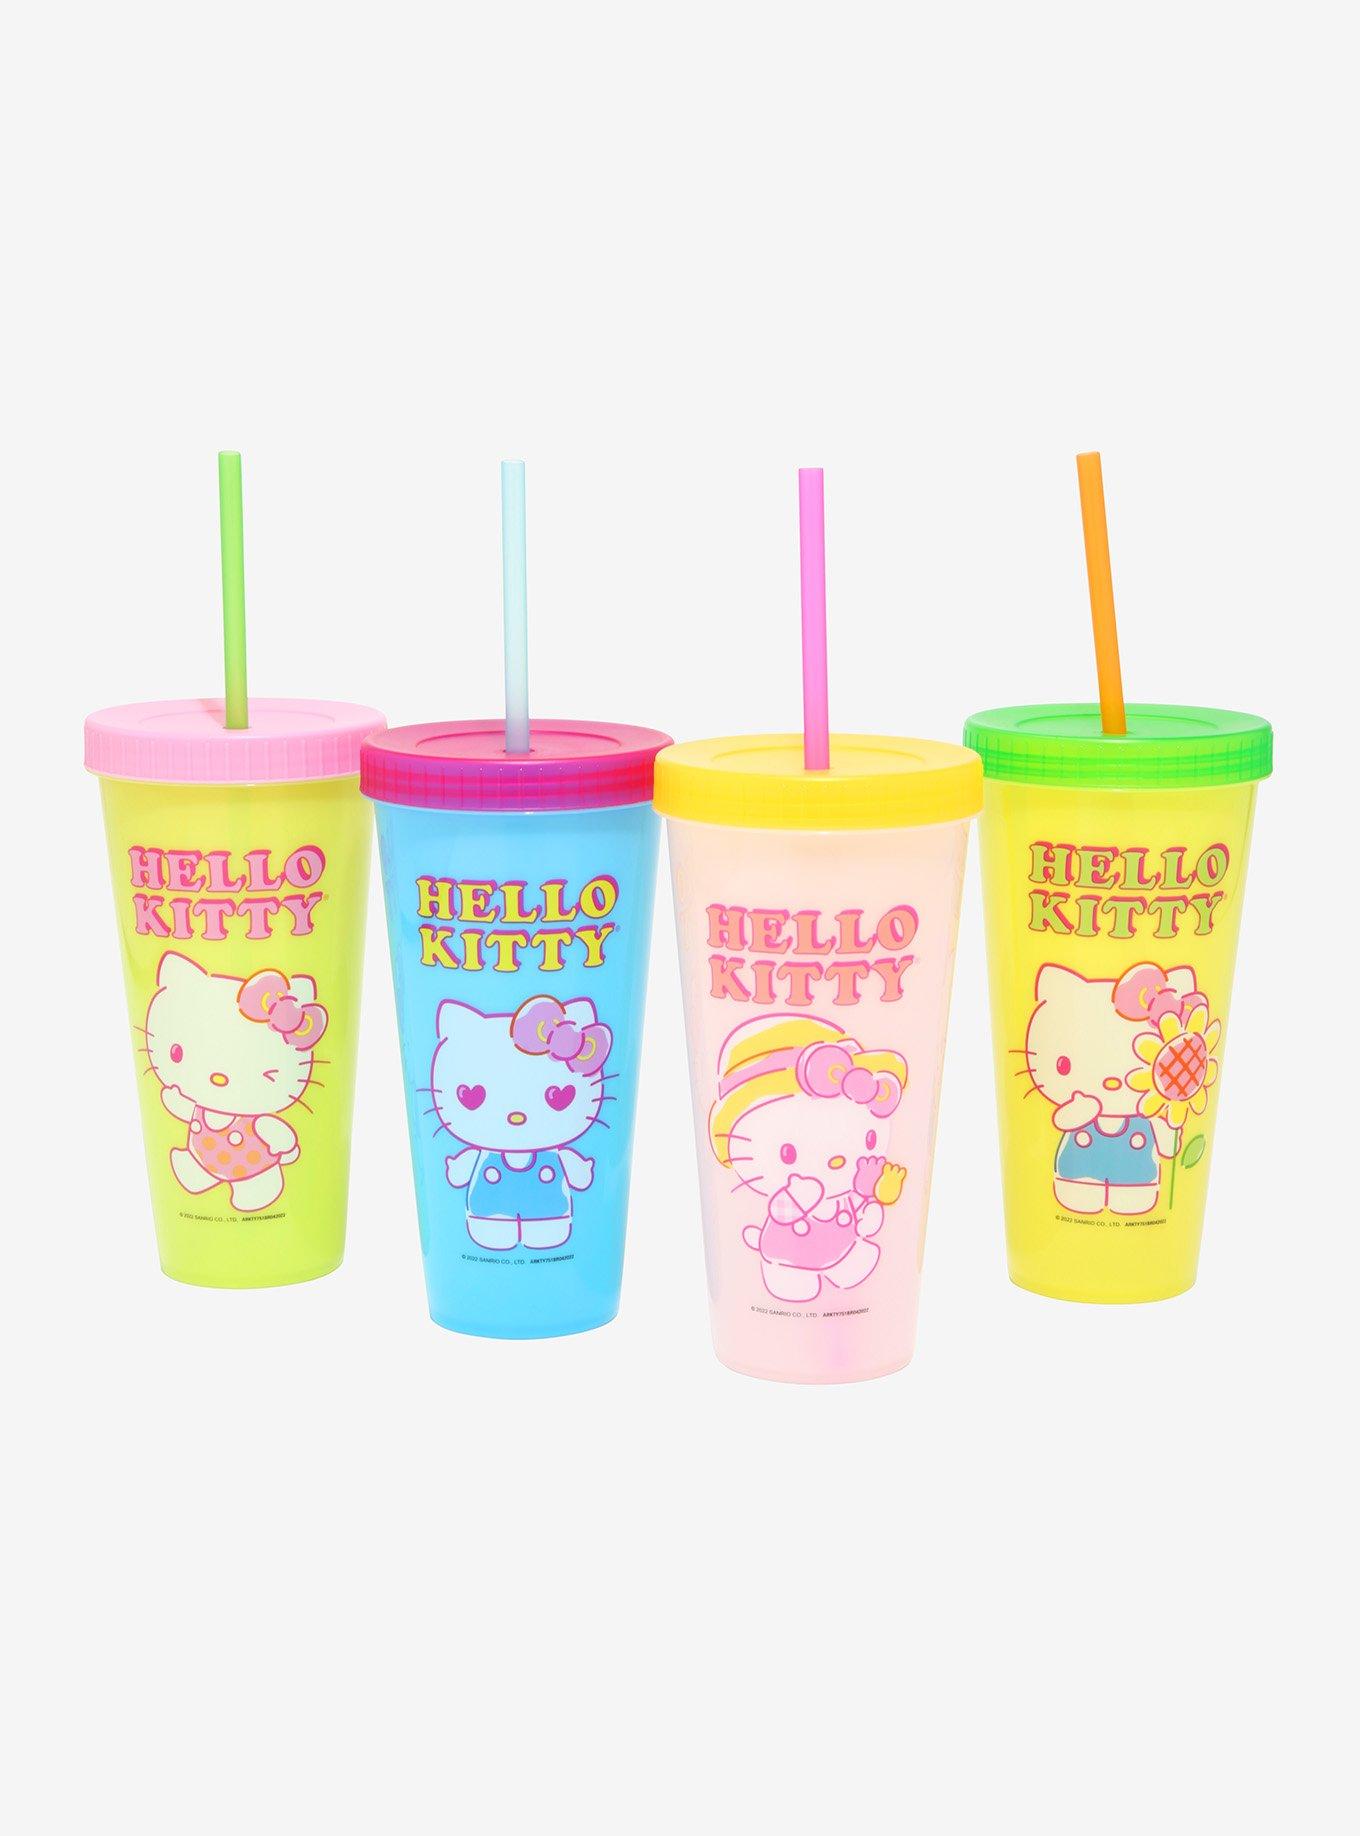 Color Changing Cup Set